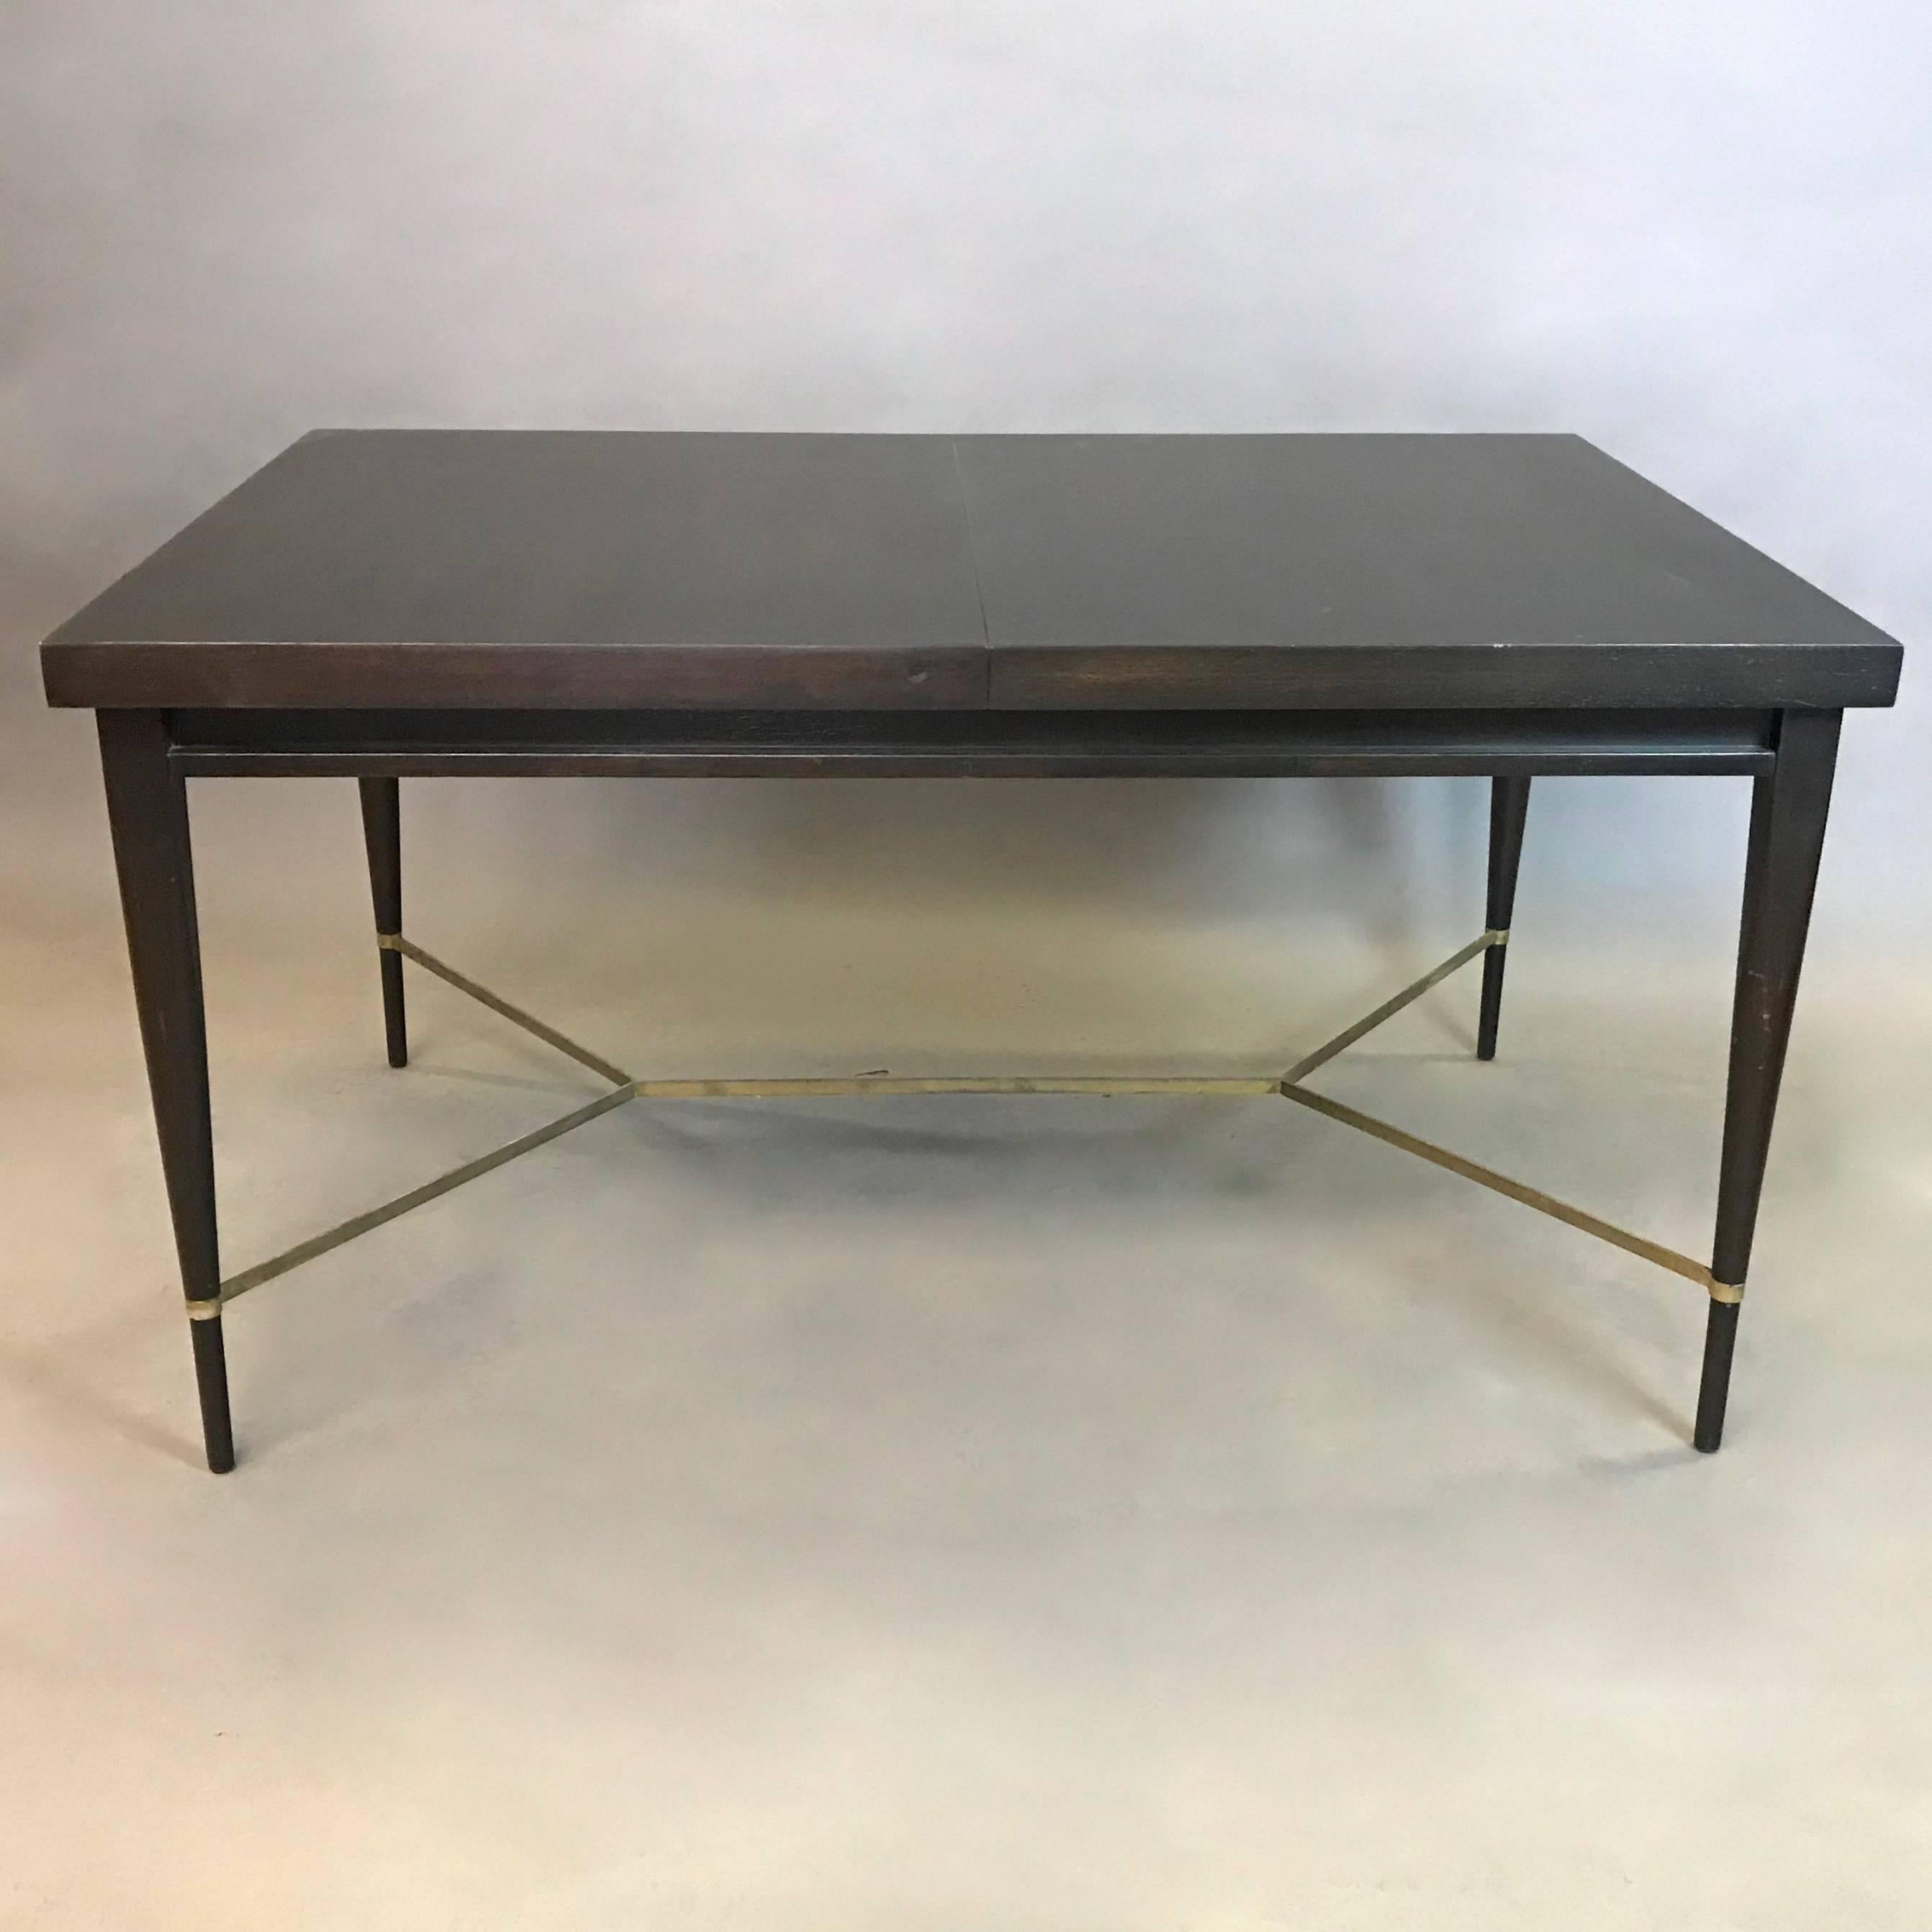 Mid-Century Modern, ebonized mahogany dining table by Paul McCobb for Calvin, Irwin collection features beautifully tapered legs and brass stretcher detail. There are no leaves included. Seats four-six people.